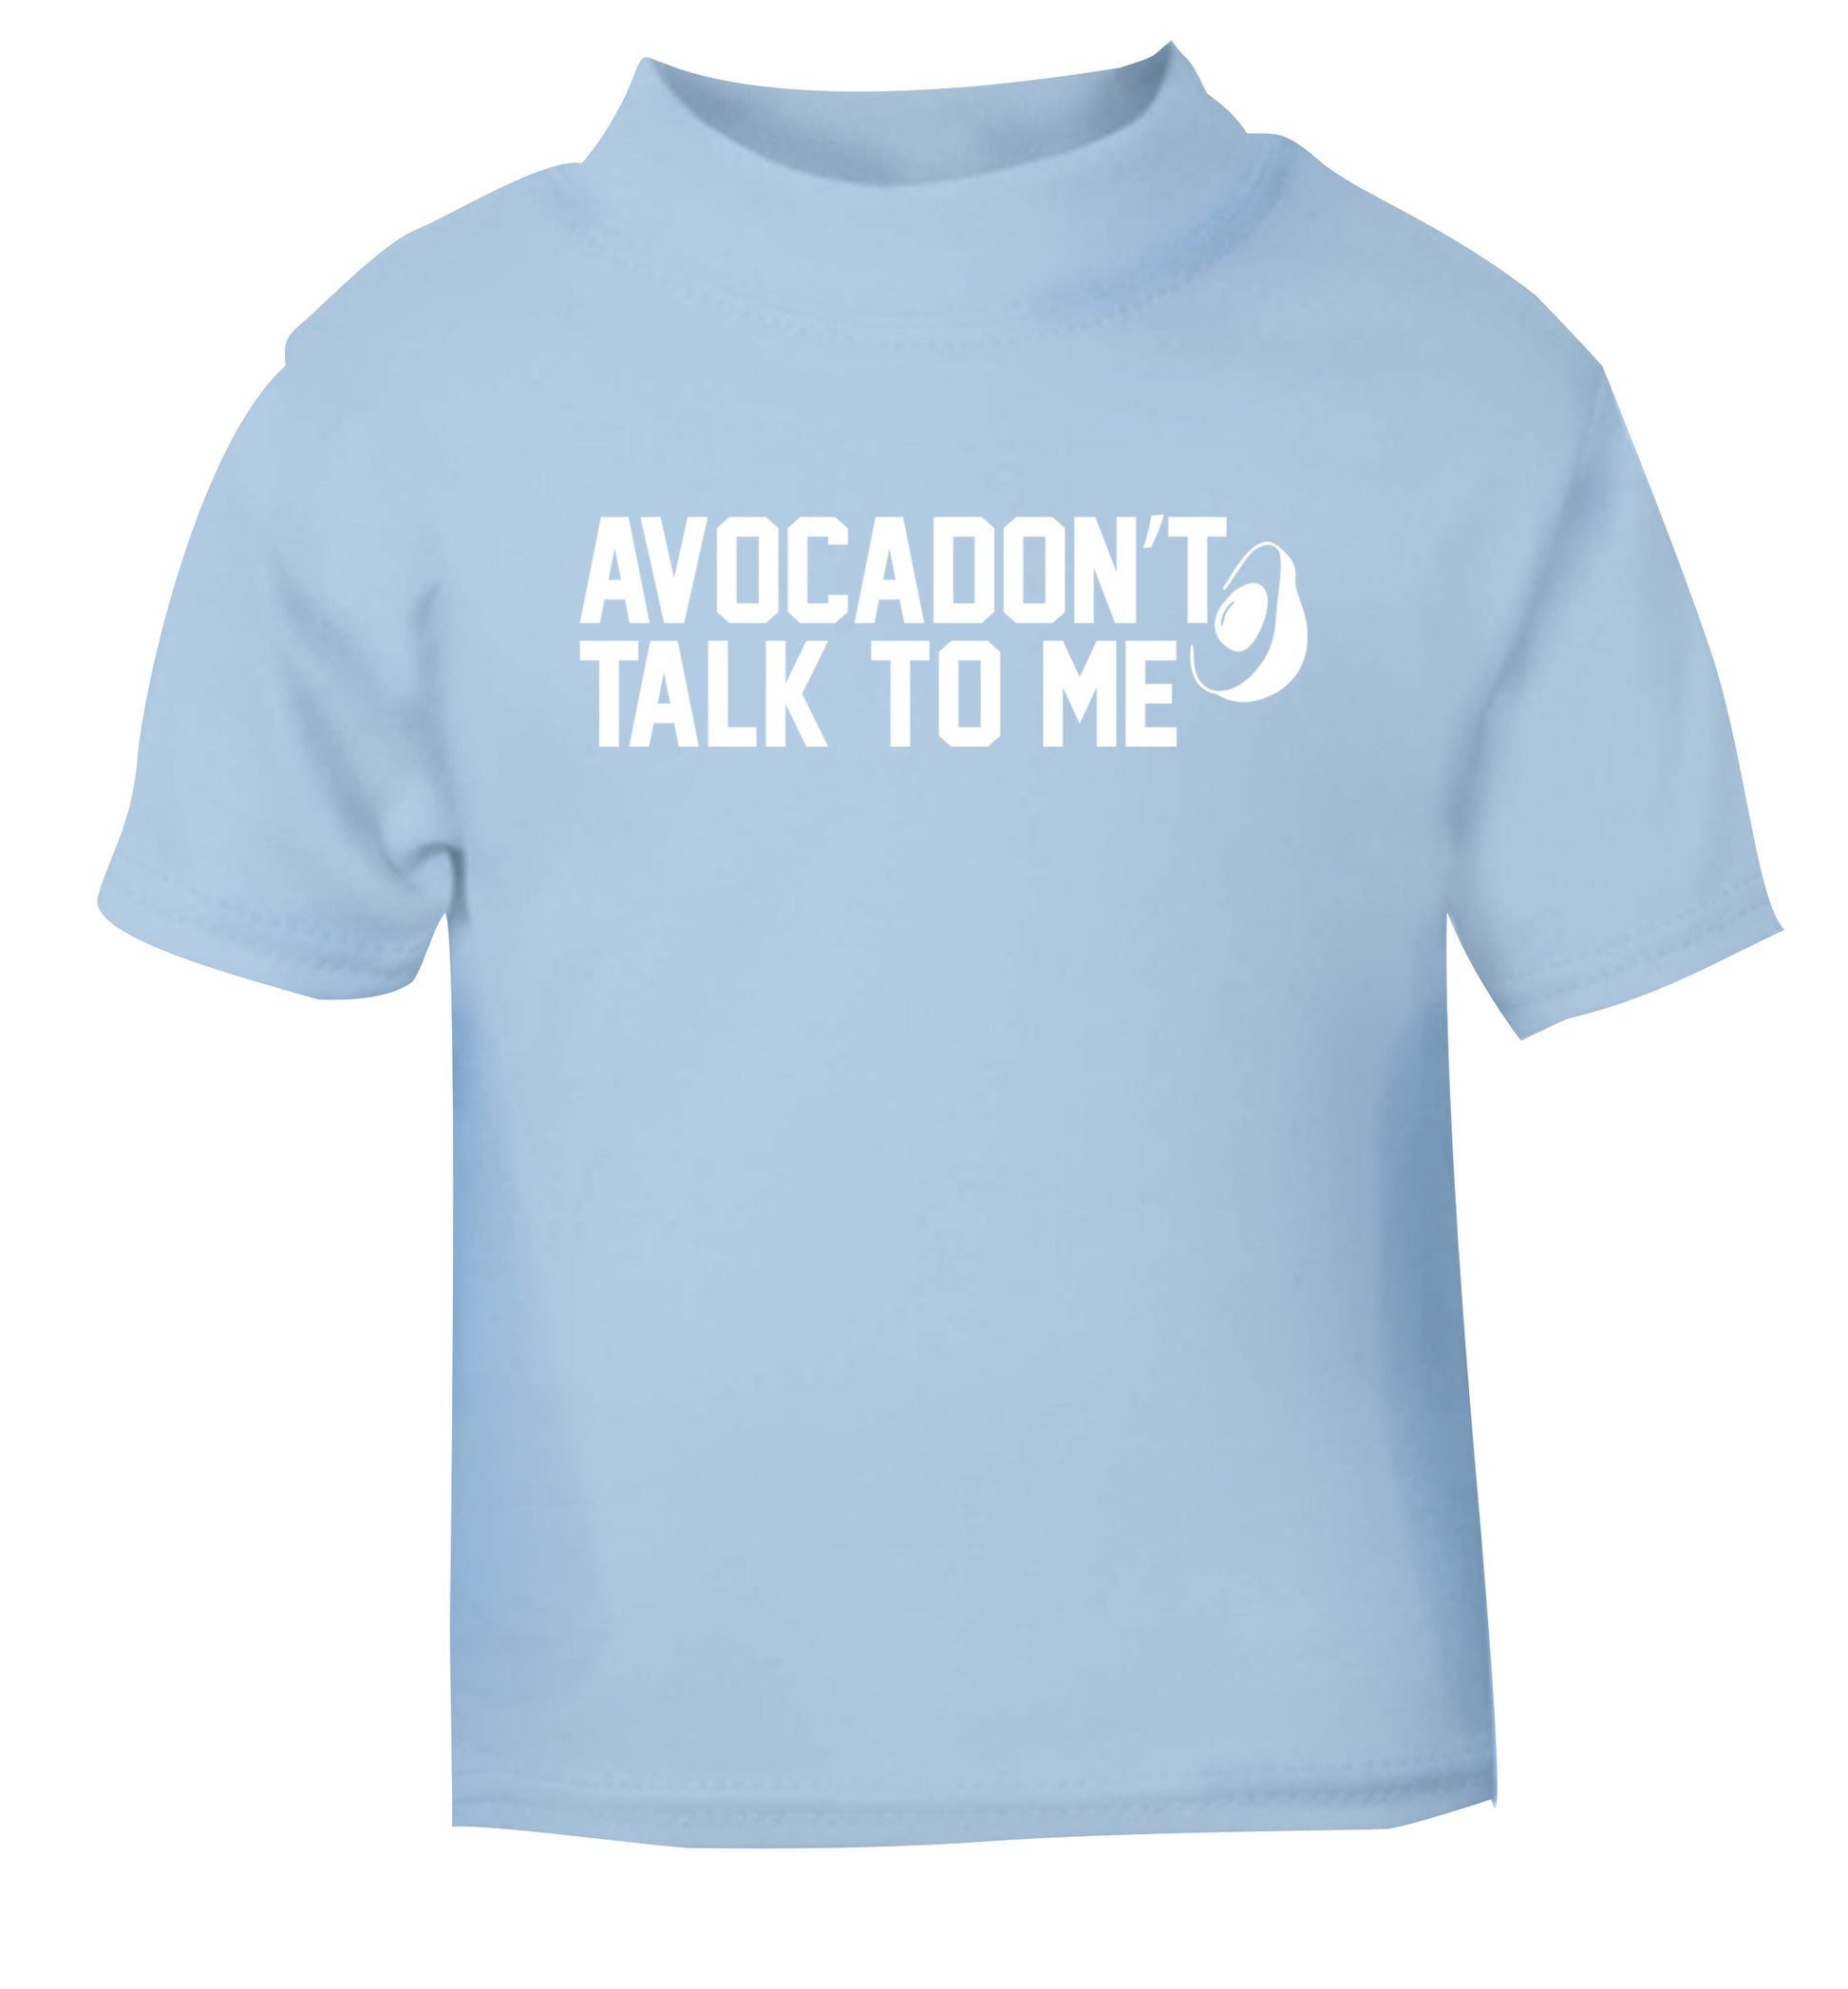 Avocadon't talk to me light blue Baby Toddler Tshirt 2 Years